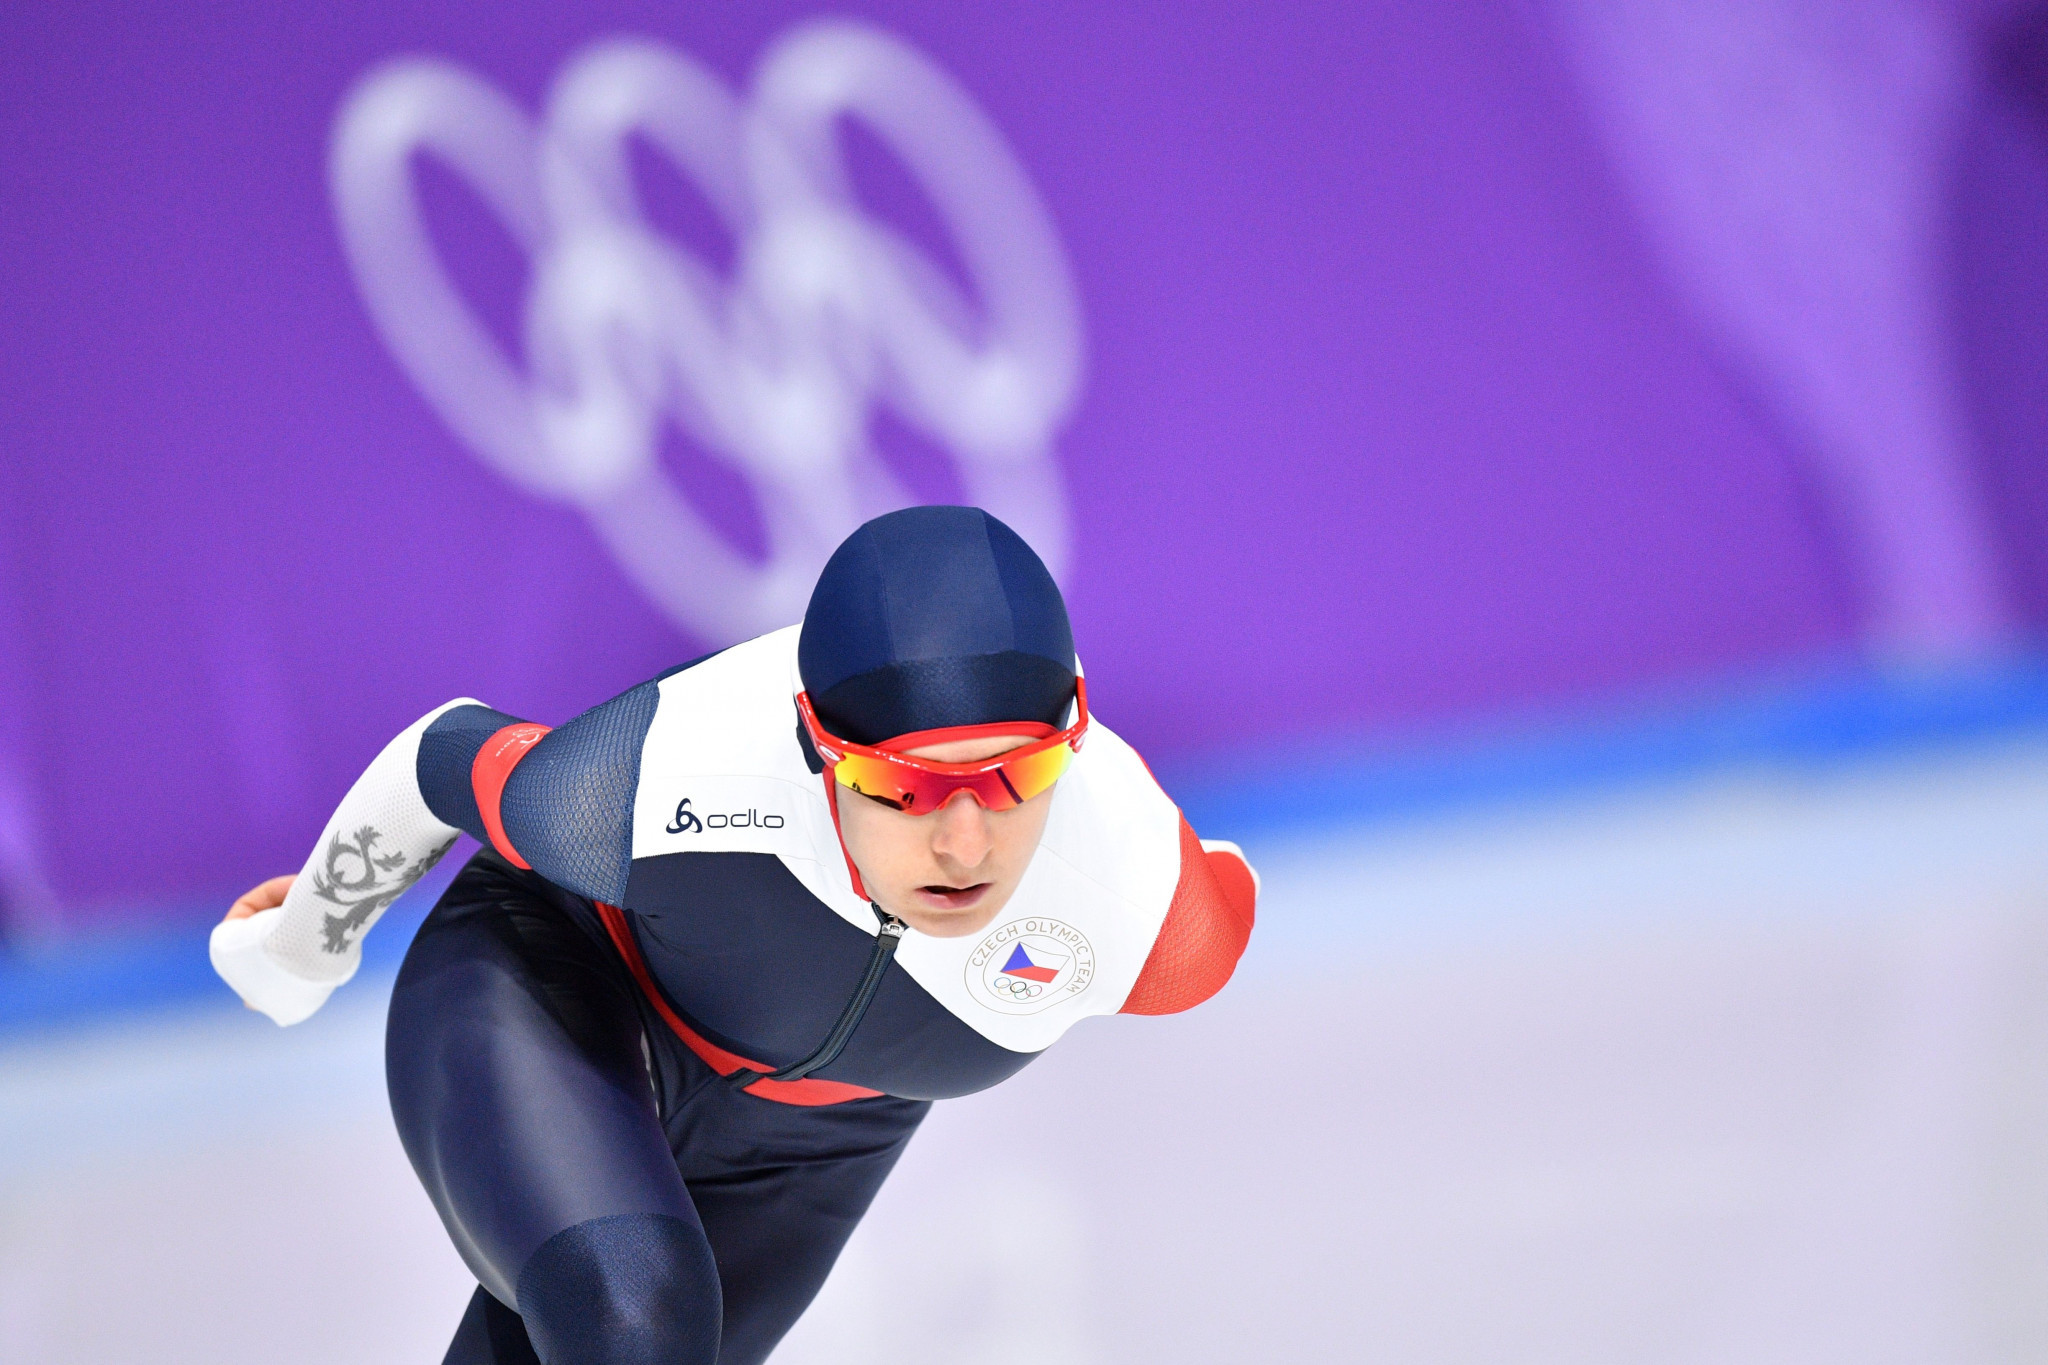 Sáblíková clinches 13th World Cup title on day one of ISU Speed Skating World Cup finals